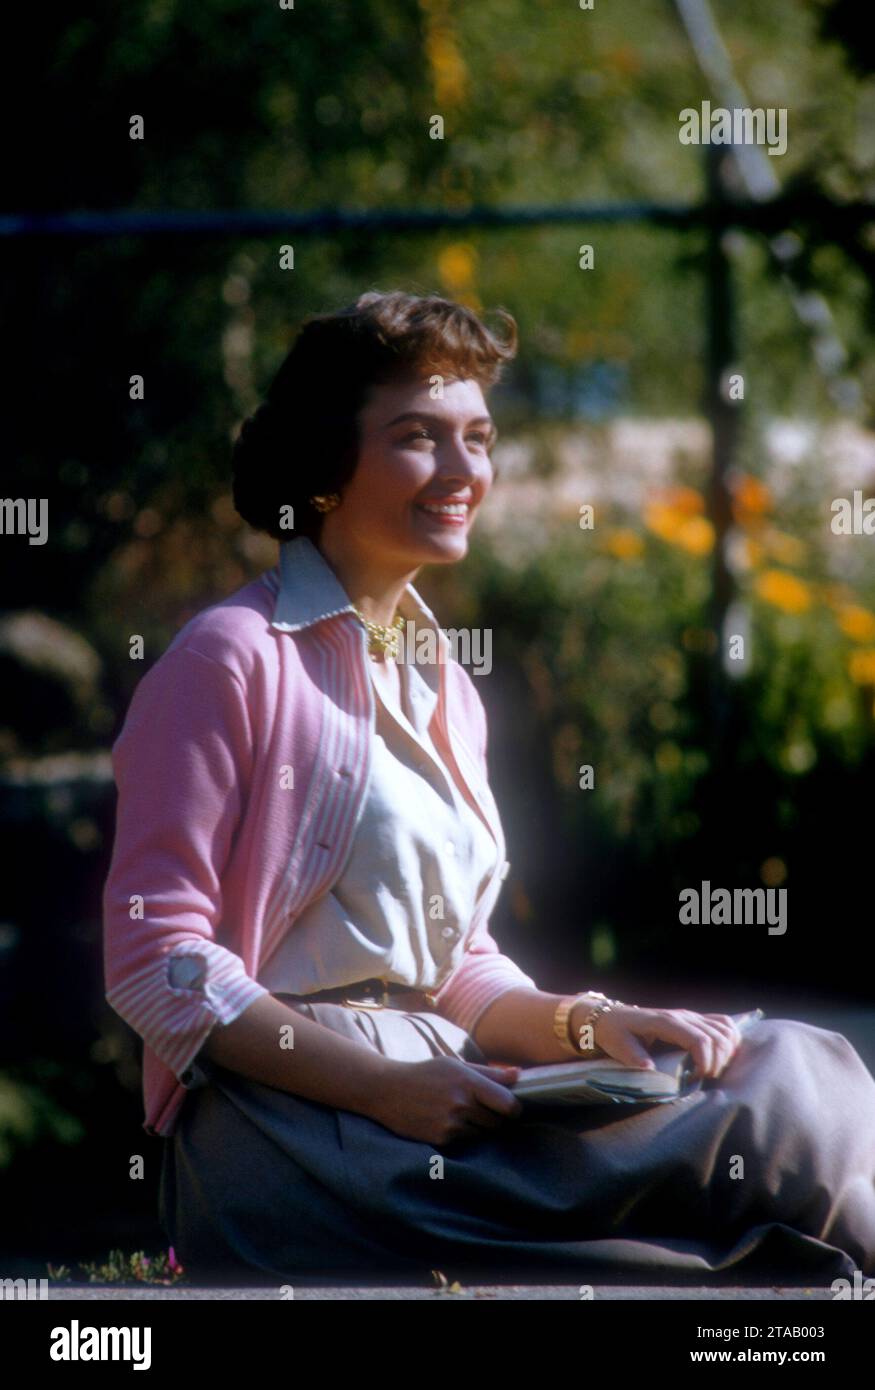 MARCH, 1955:  American film and television actress Donna Reed (1921-1986) poses for a portrait in a convertible circa March, 1955.  (Photo by Hy Peskin) *** Local Caption *** Donna Reed Stock Photo